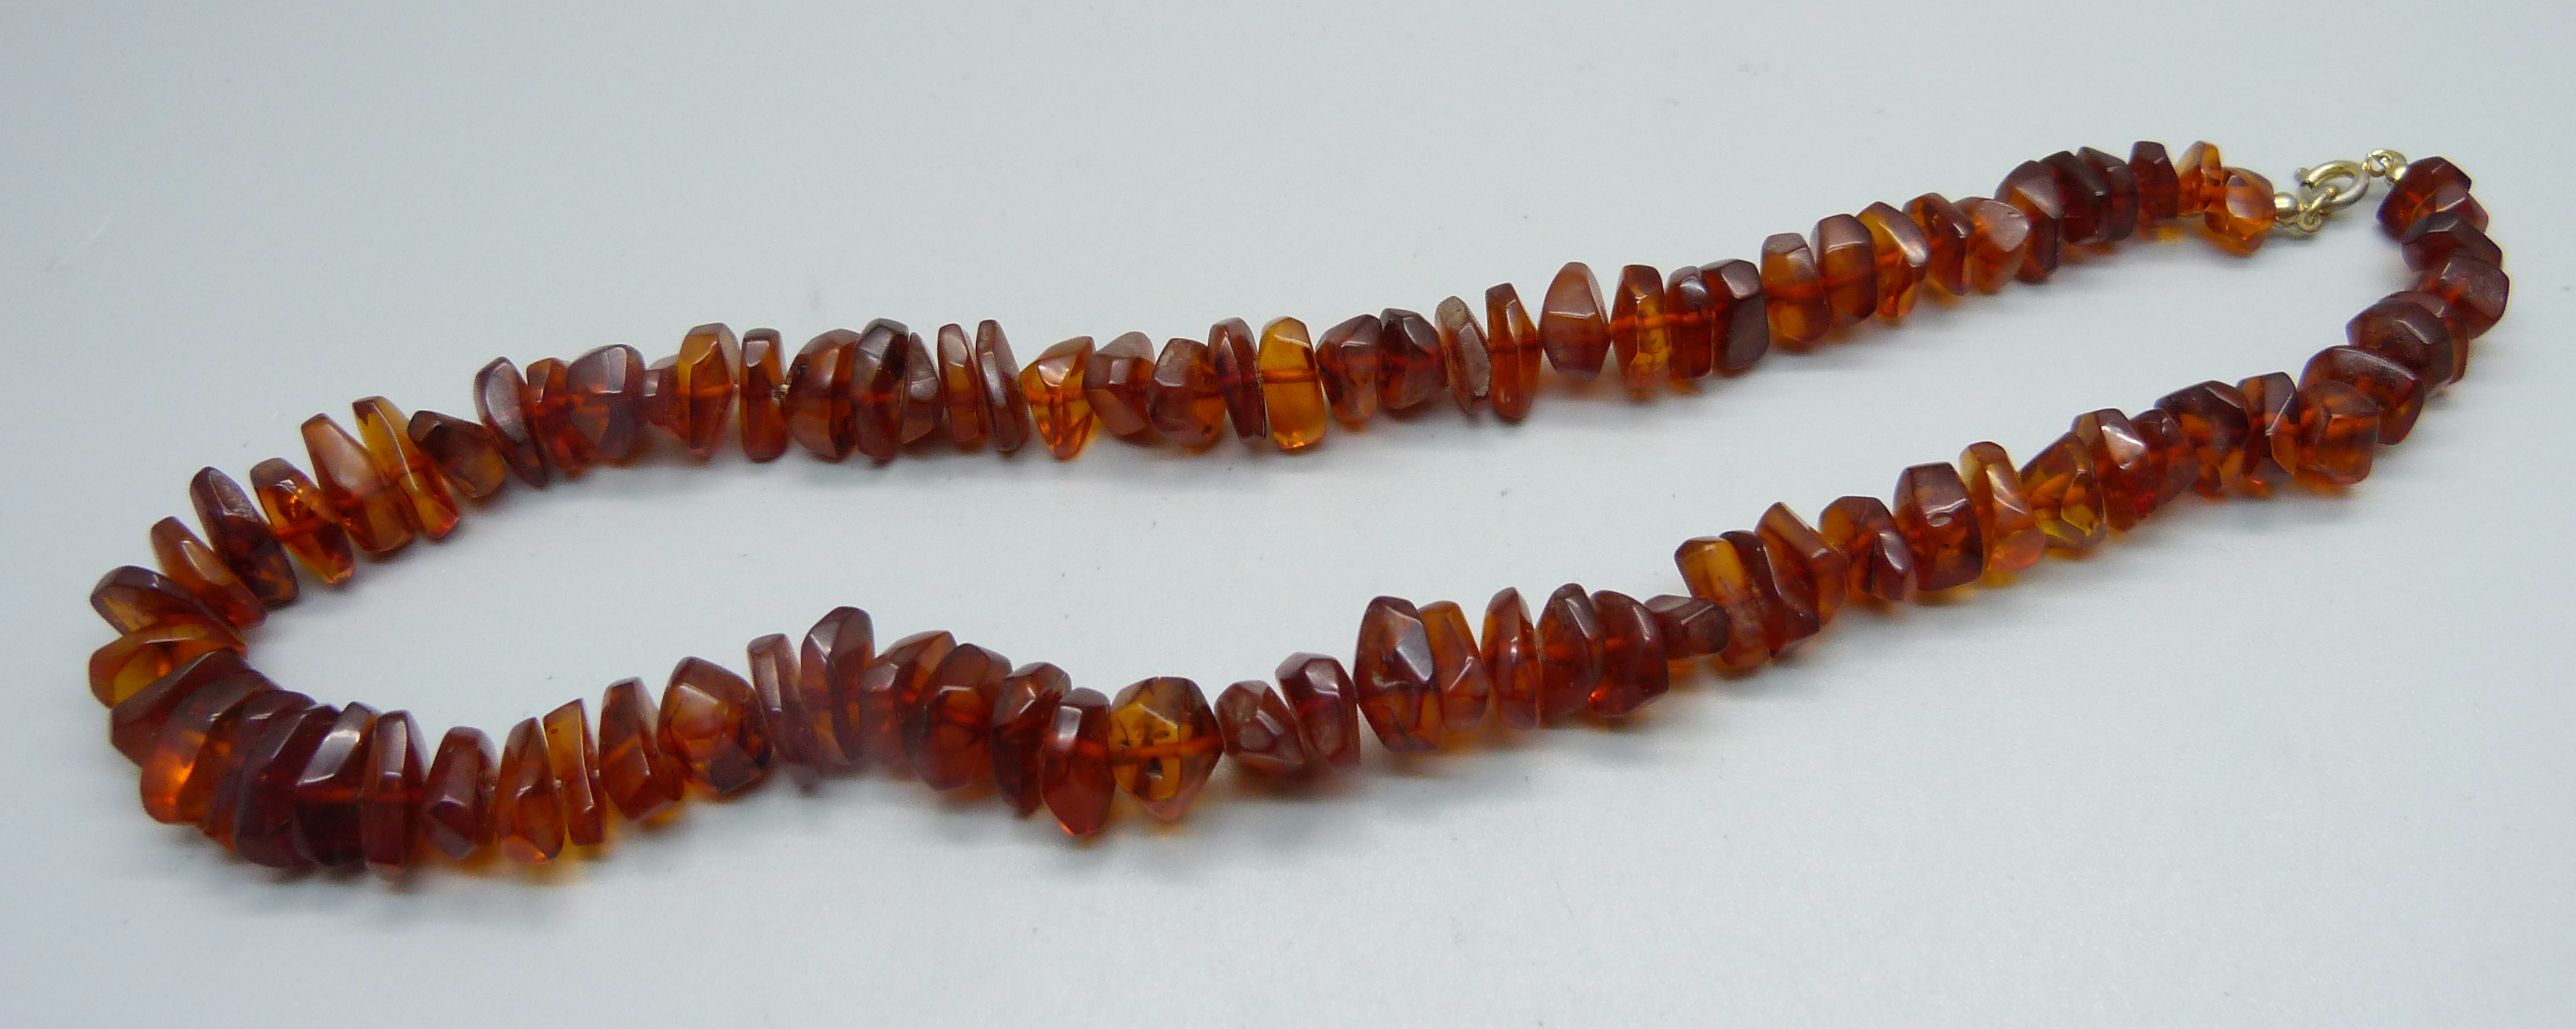 An amber necklace